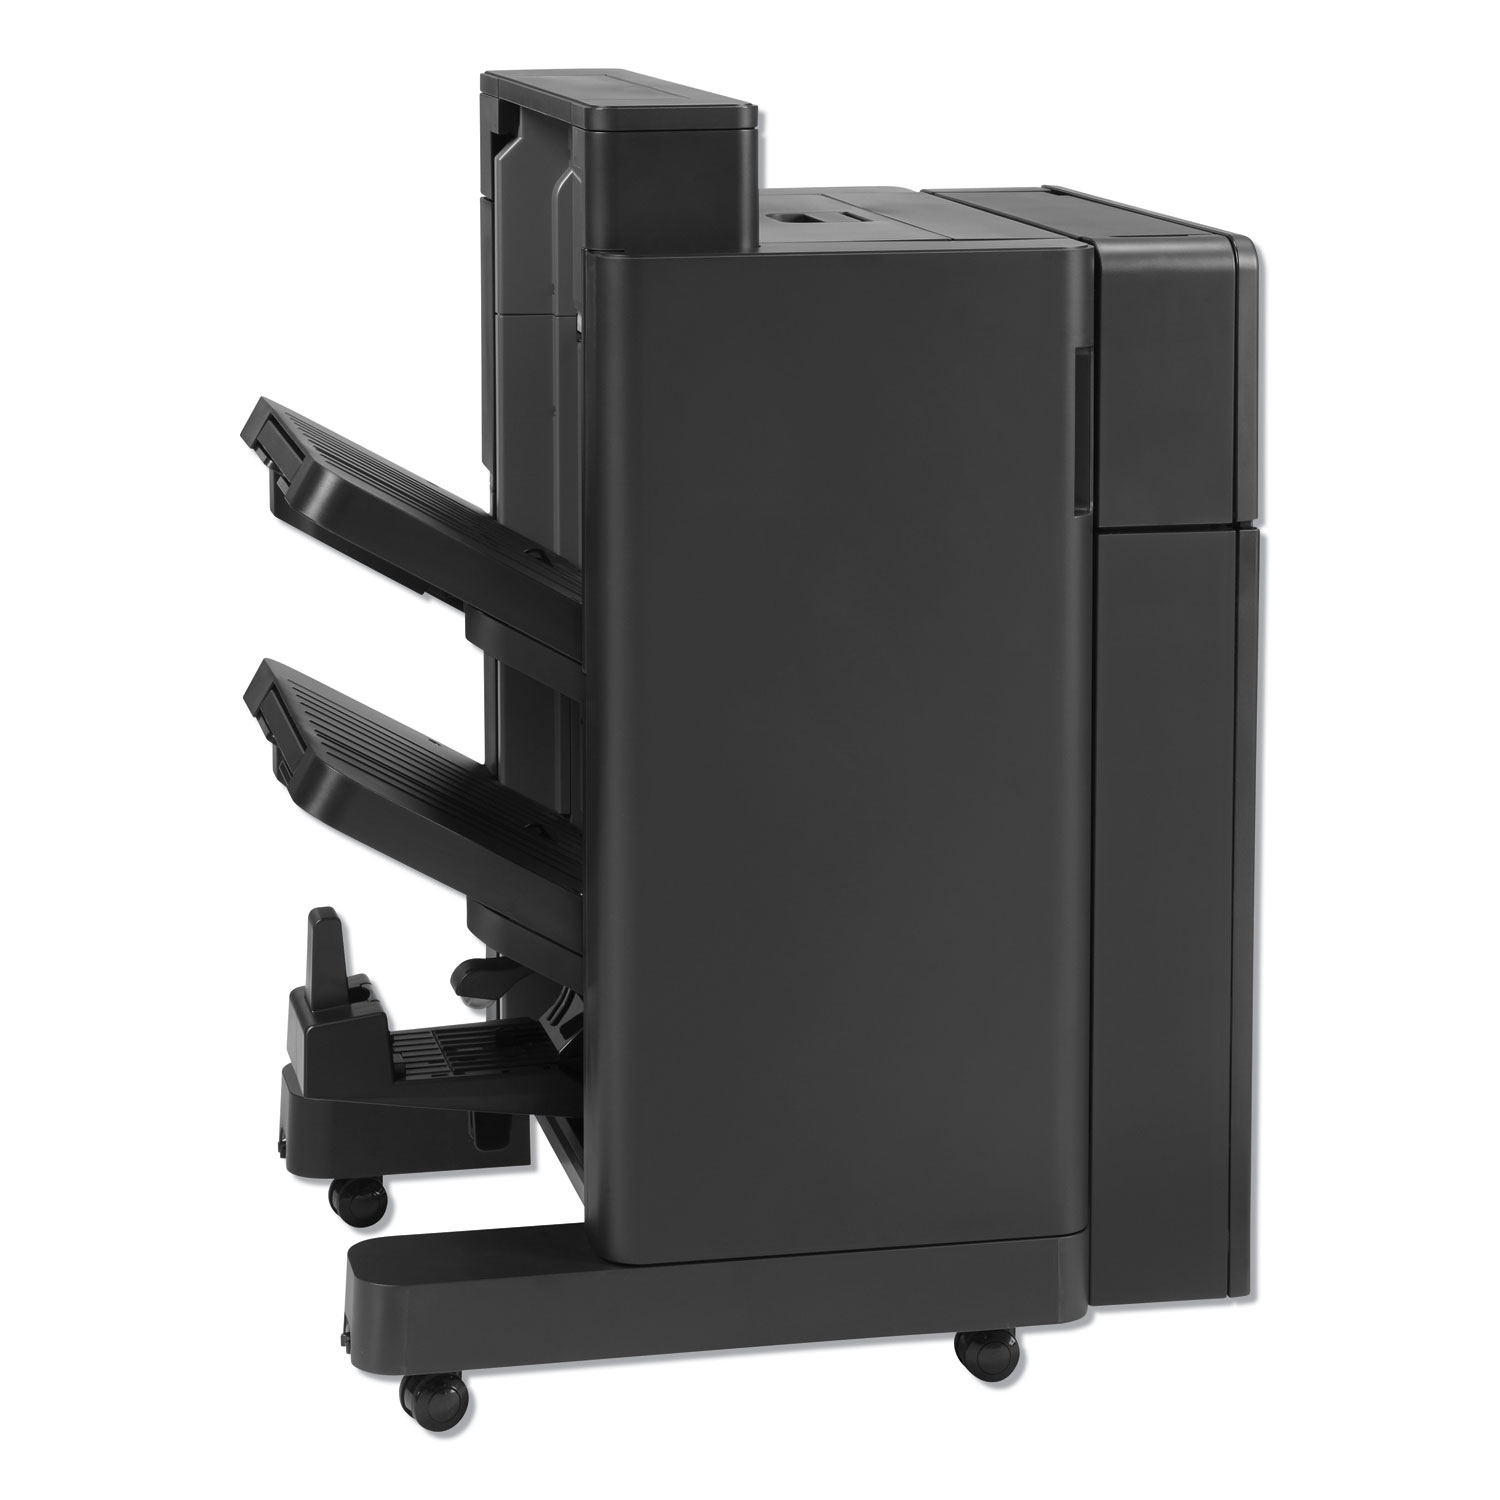  HP A2W84A Booklet Maker/Finisher with 2/3 Hole Punch for Color LaserJet M880, M855 Series (HEWA2W84A) 